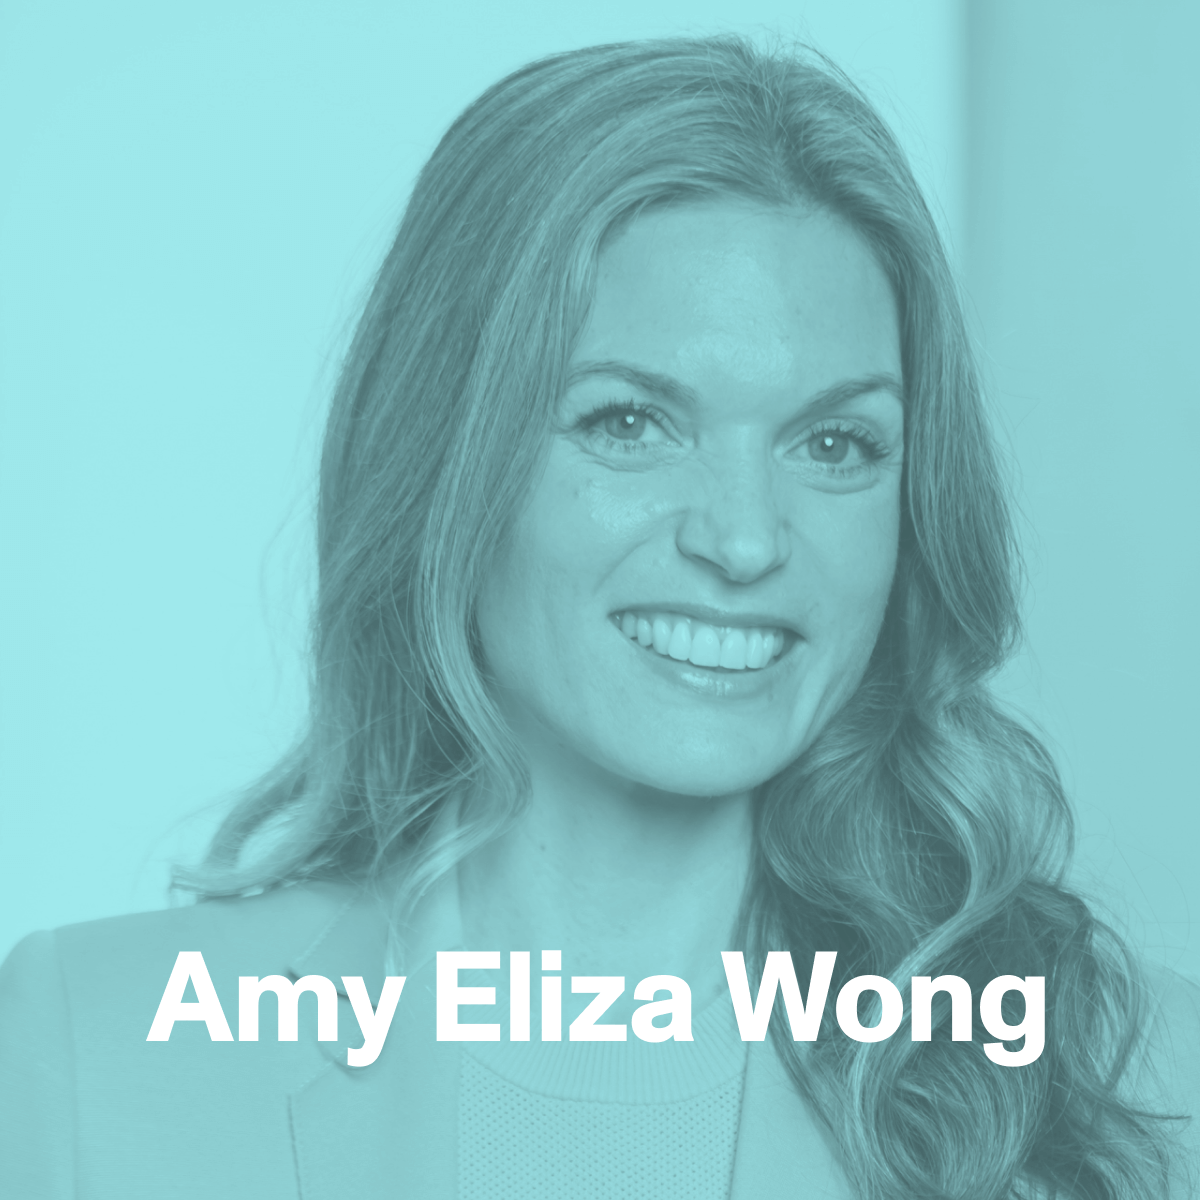 Amy Eliza Wong is an Executive Coach, Author, and Motivational Speaker.